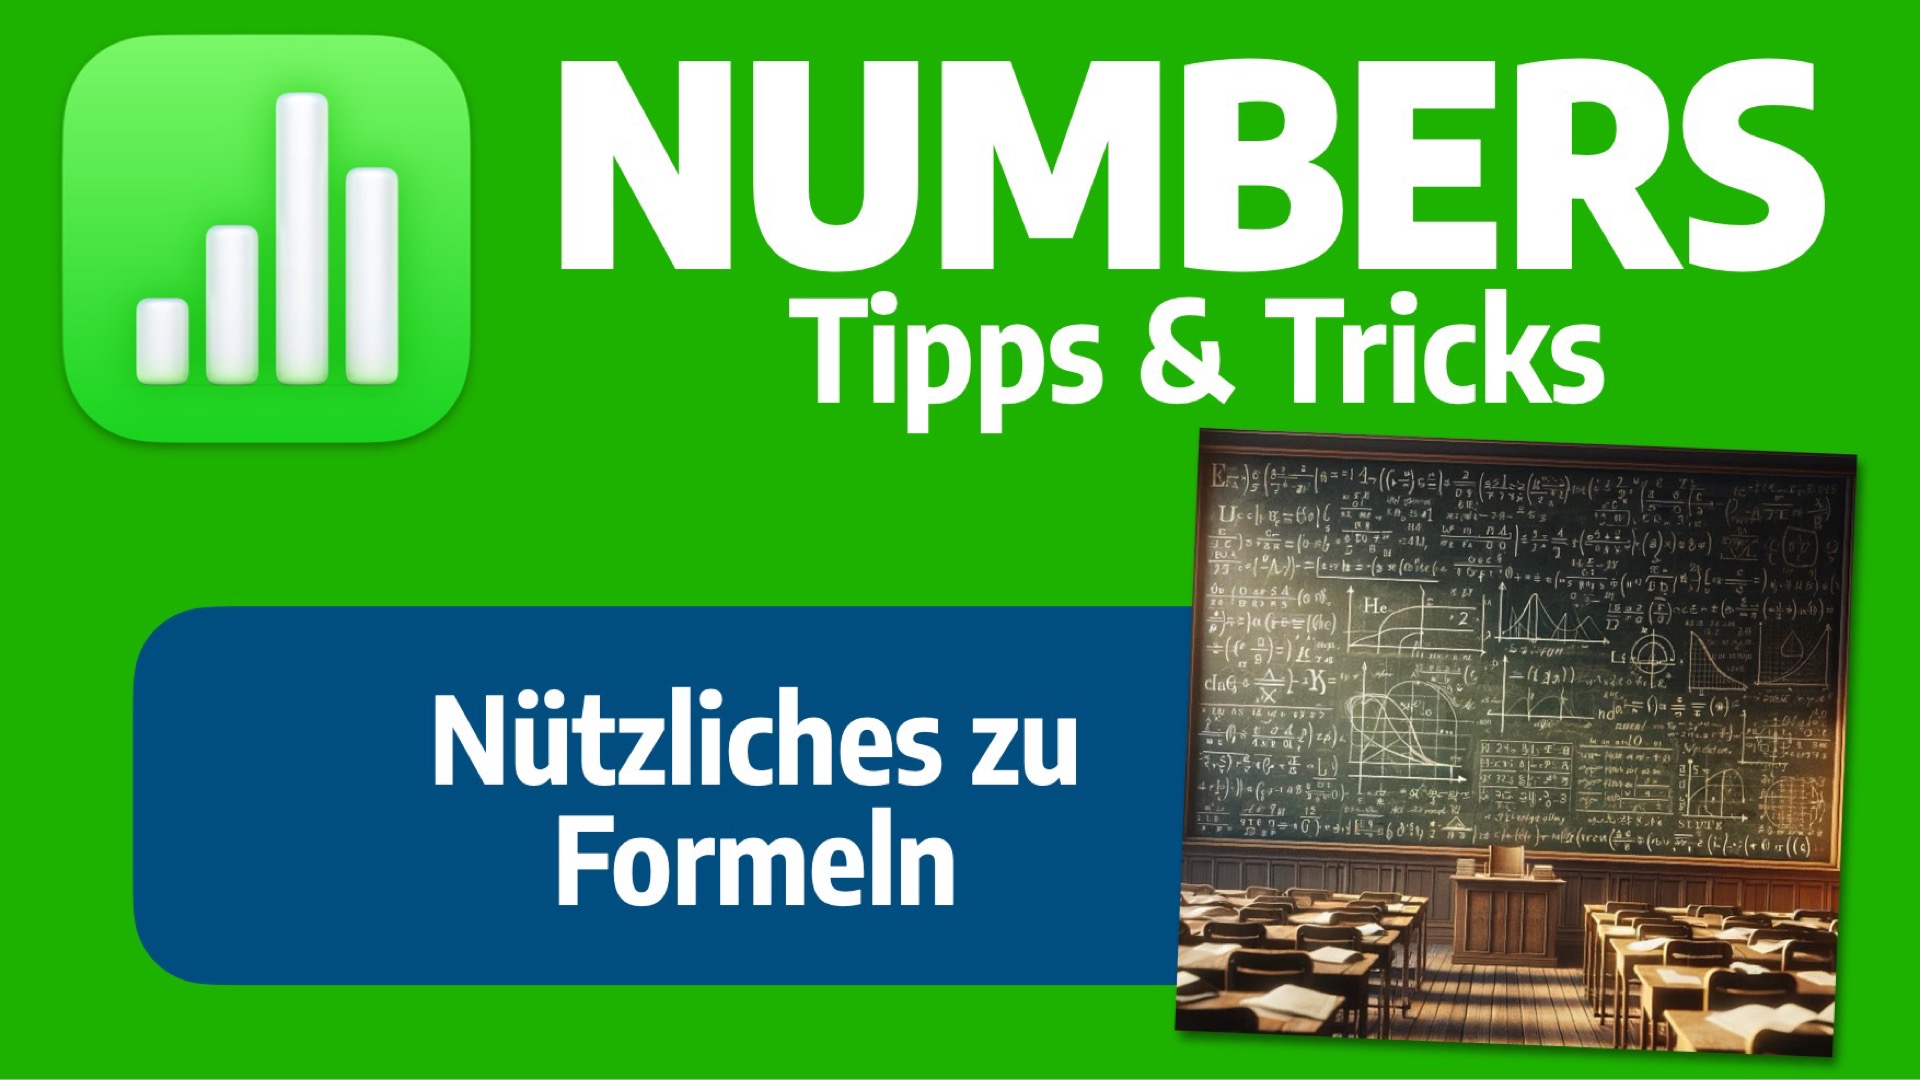 Image for NUMBERS: N�tzliches zu Formeln